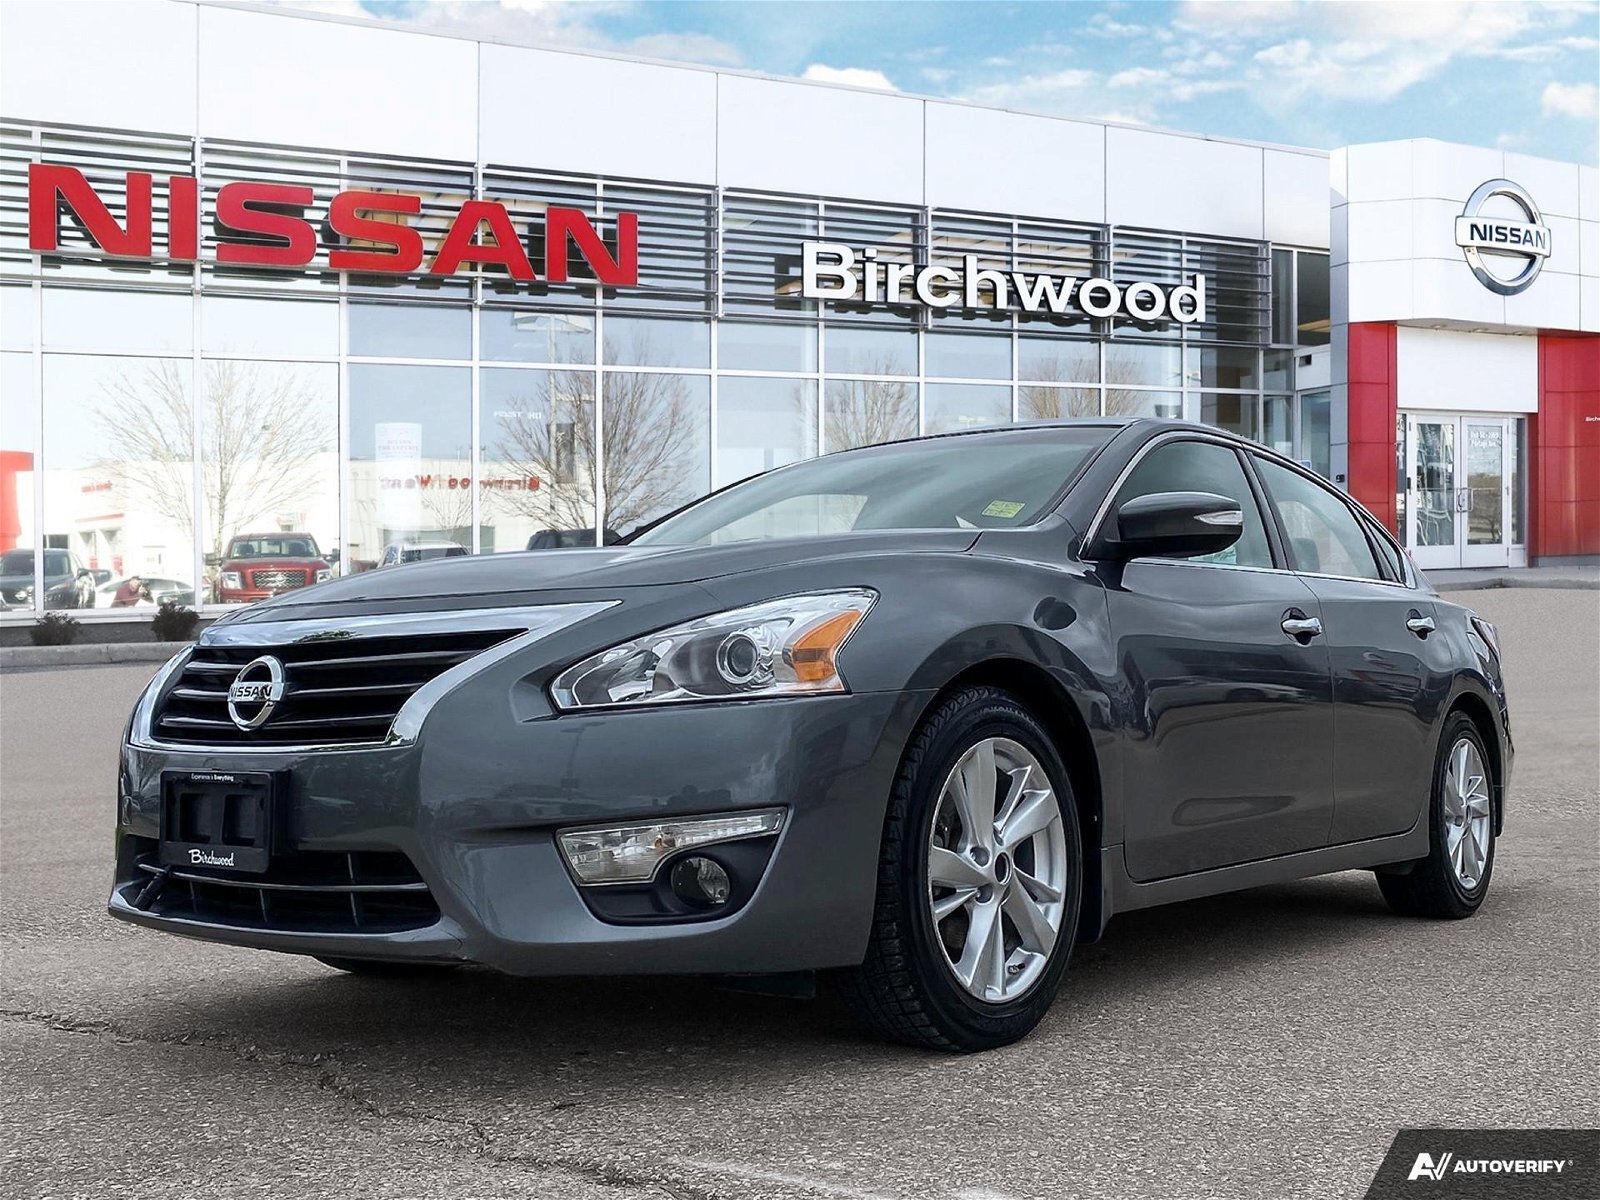 2014 Nissan Altima 2.5 SL Locally Owned | One Owner | Low KM's